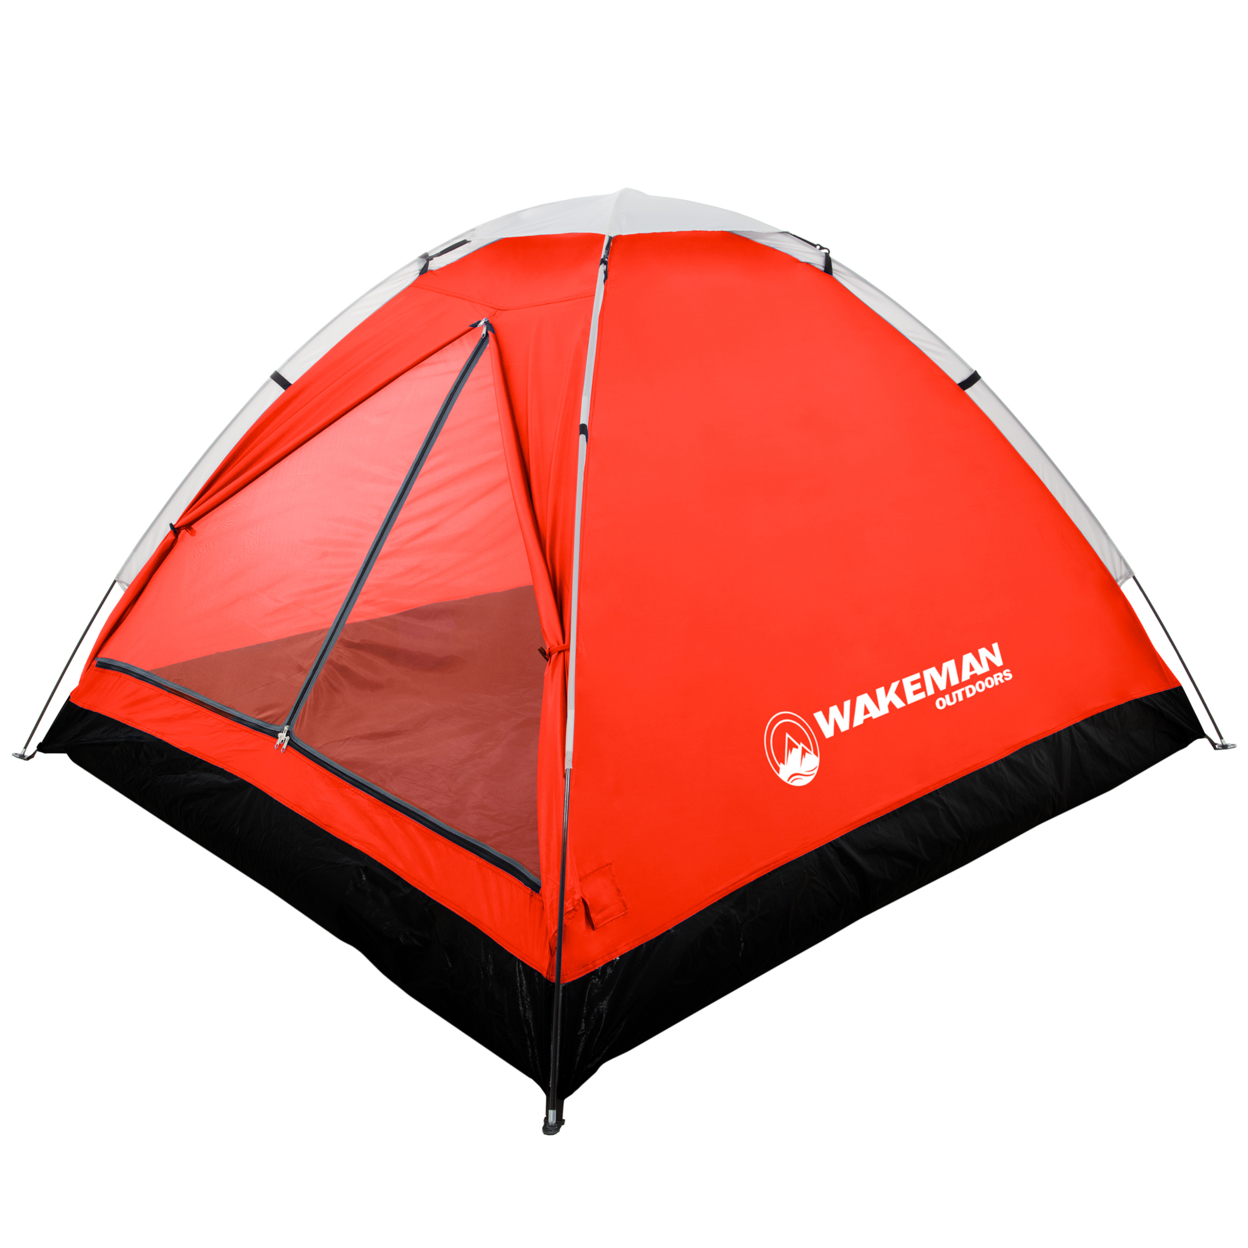 2-Person Tent, Water Resistant Dome Tent For Camping With Removable Rain Fly And Carry Bag, Lost River 2 Person Tent (Red/Gray)